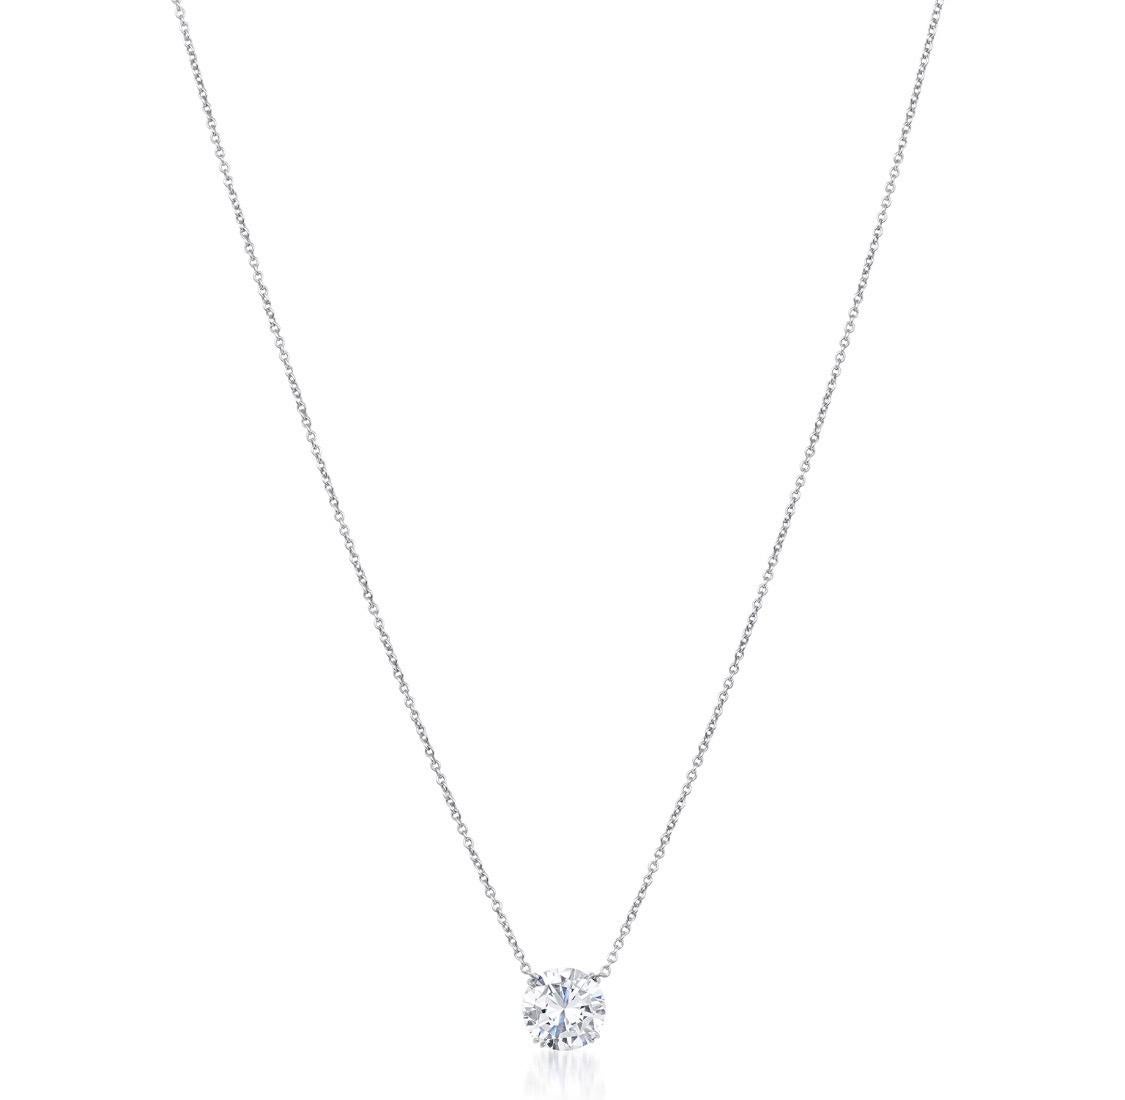 Exquisite round cut diamond pendant necklace.
This dazzling diamond weighing 2.27 carat is graded by the GIA E in color I1 clarity. This diamond Is special and unique for being perfectly cut with an exceptional flow of translucency throughout the